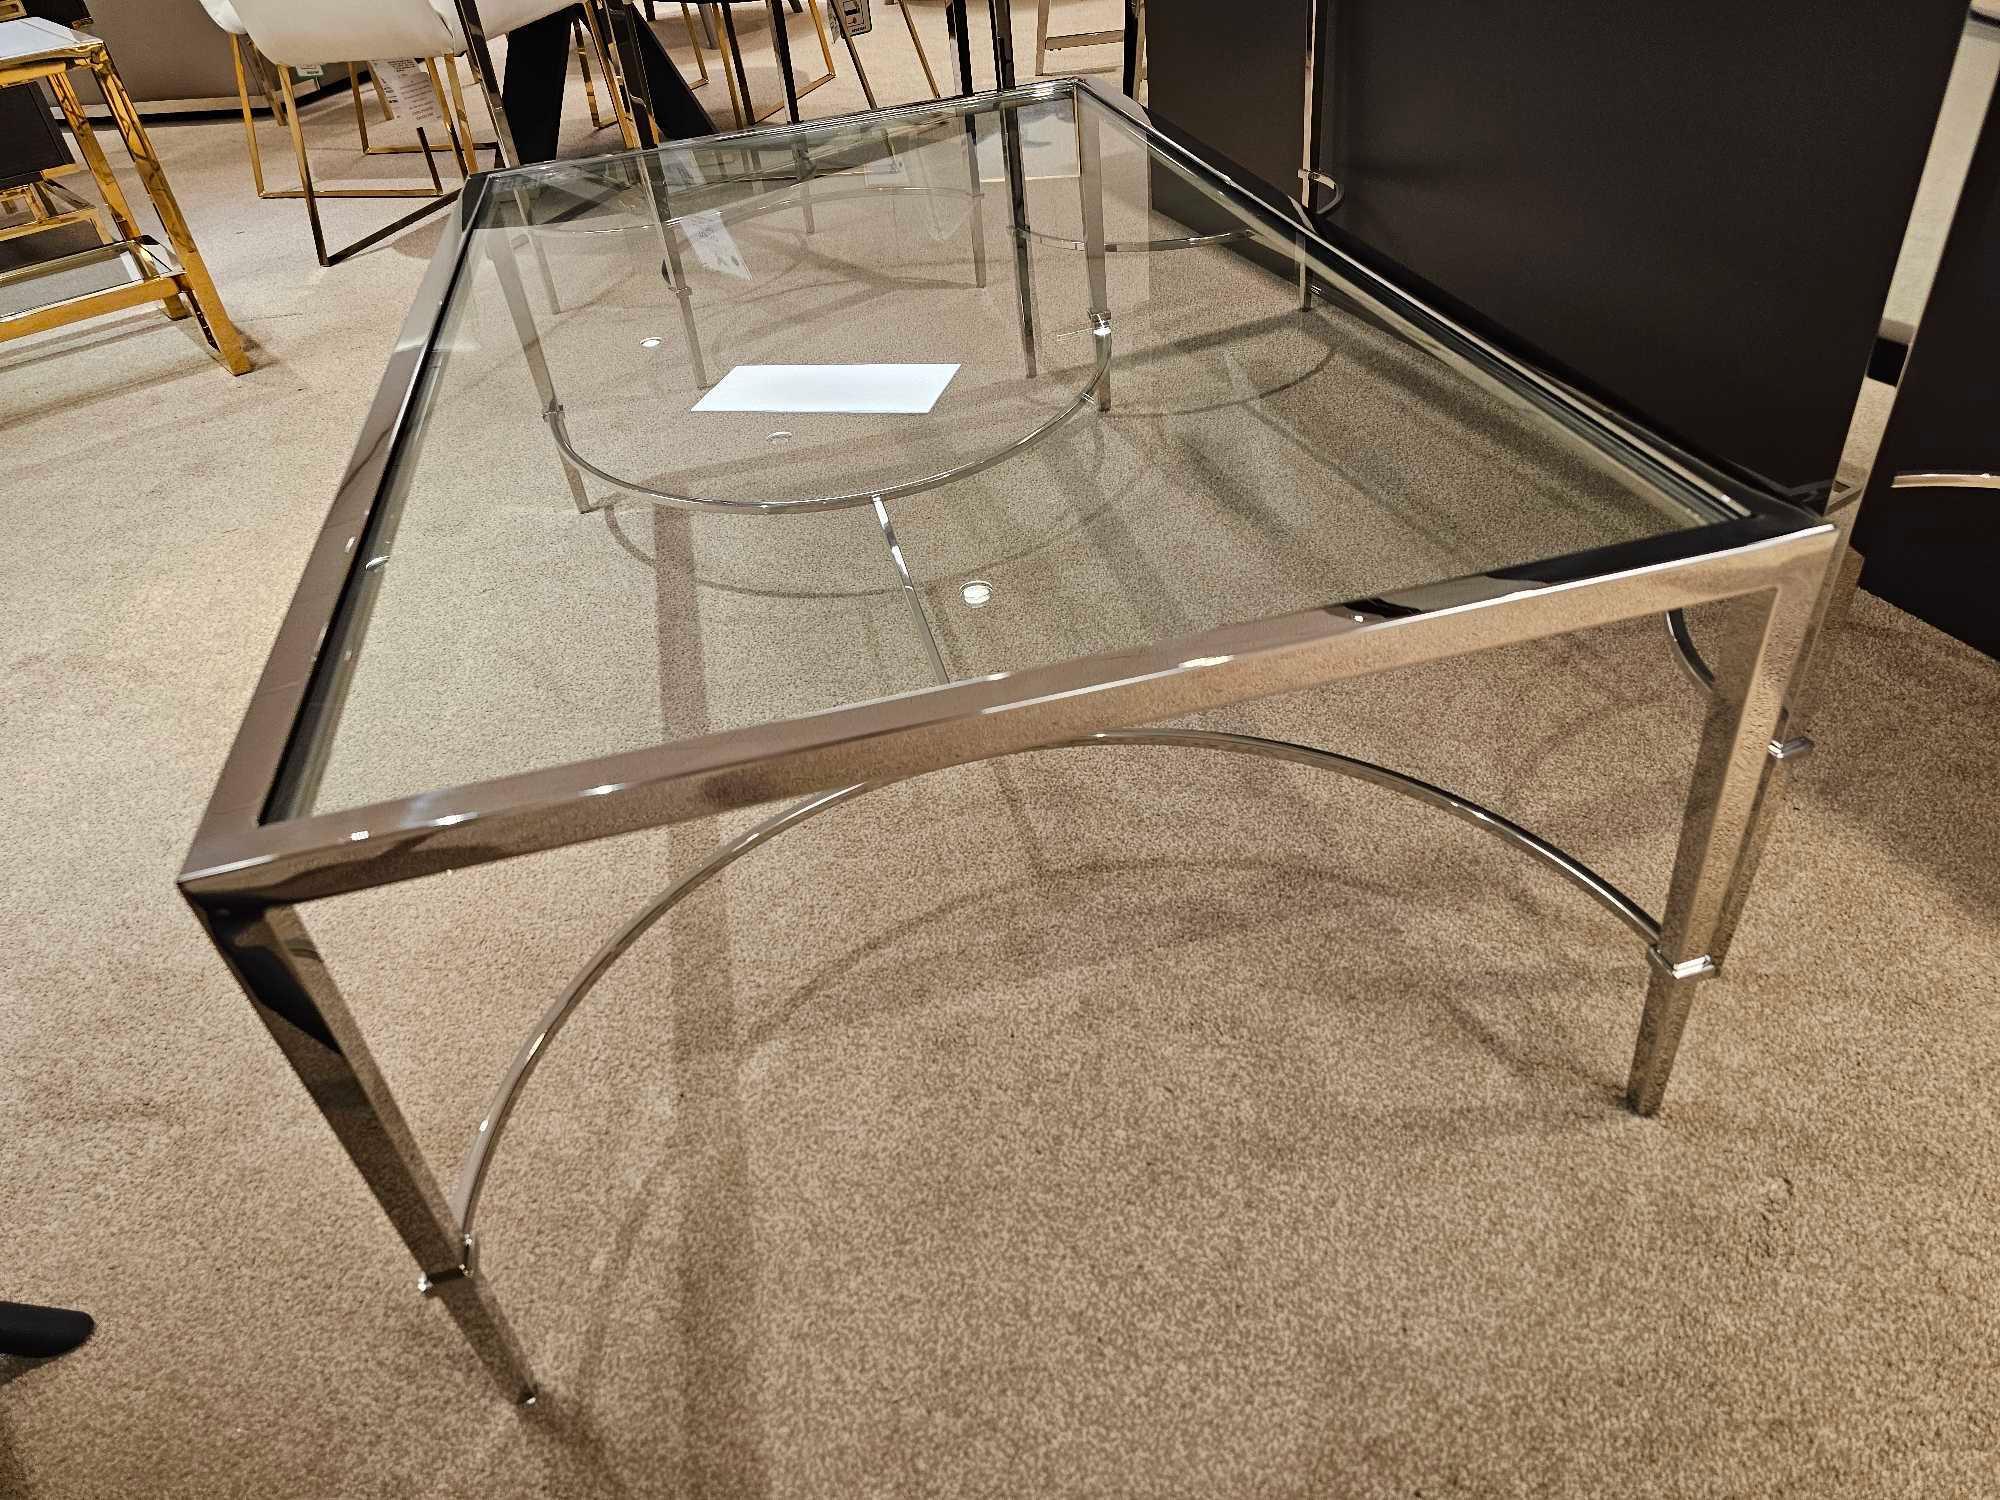 Tokyo Coffee Table by Kesterport The Tokyo coffee table with its clear glass top and a refined - Image 4 of 6